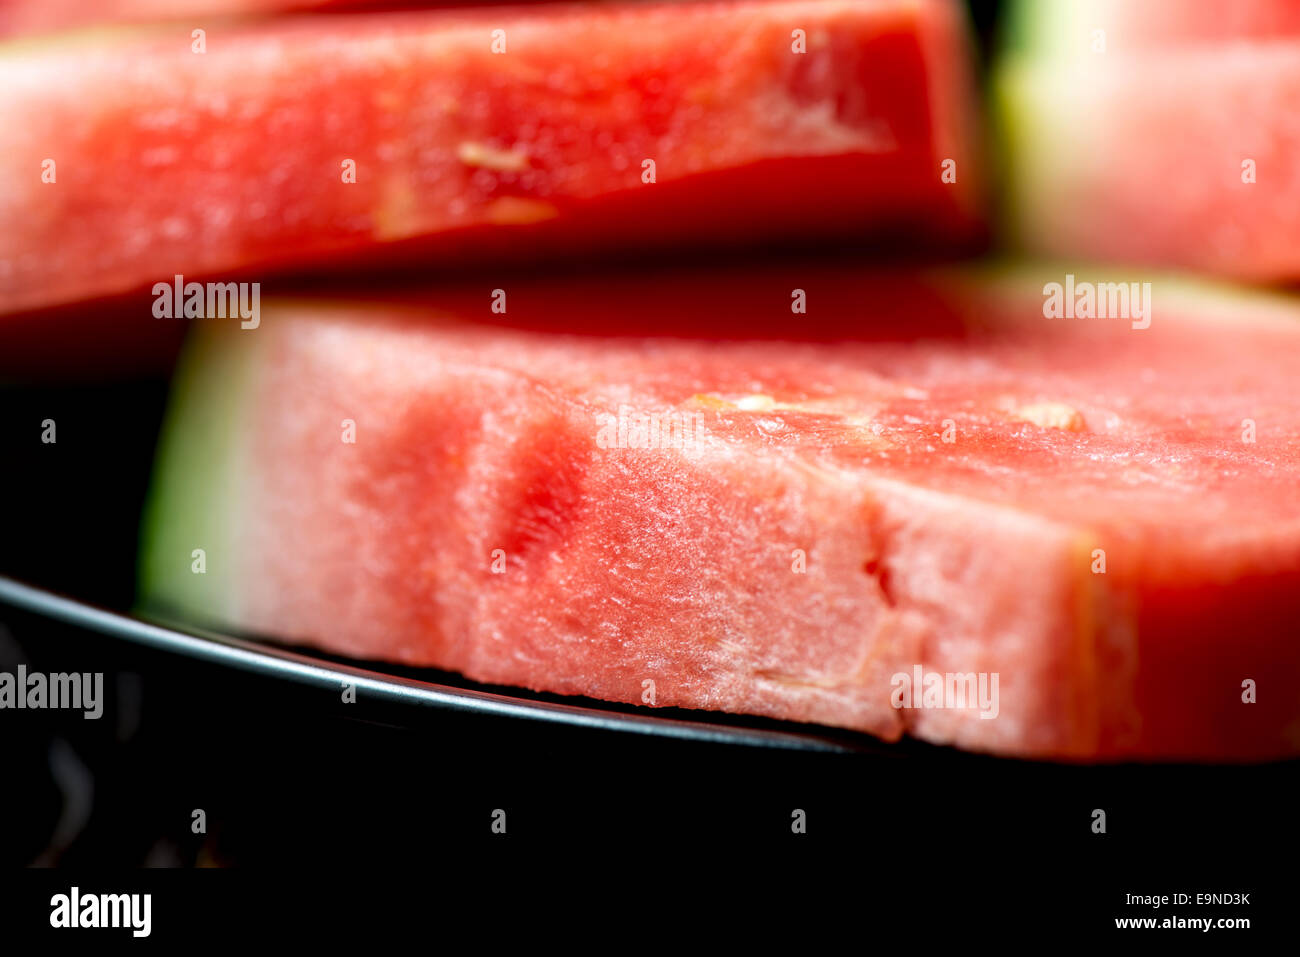 Red watermelon in plate on wooden table Stock Photo